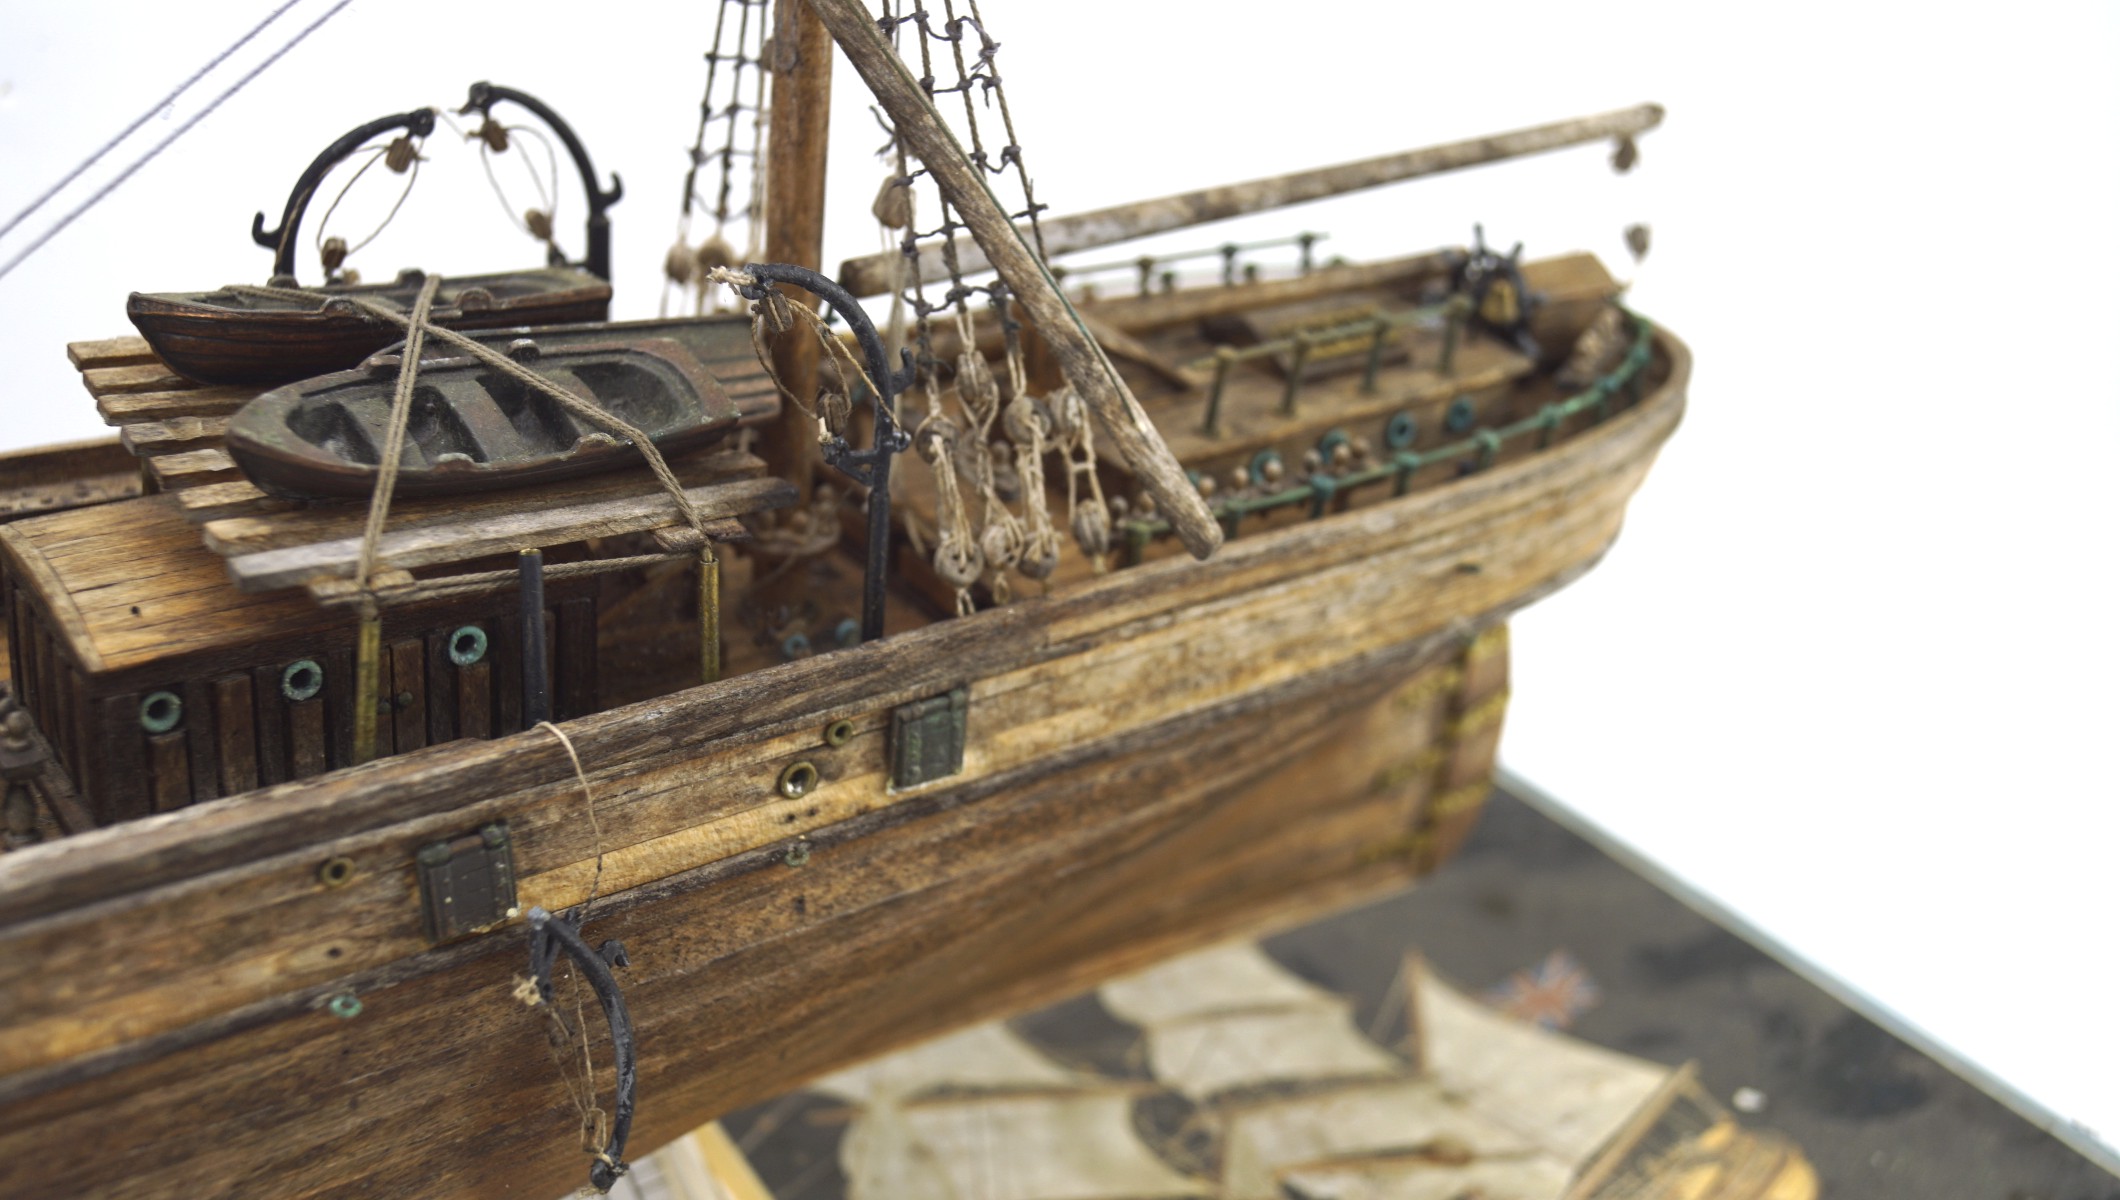 A scratchbuilt wooden boat depicting the Cutty Sark, by Constructo, - Image 2 of 2